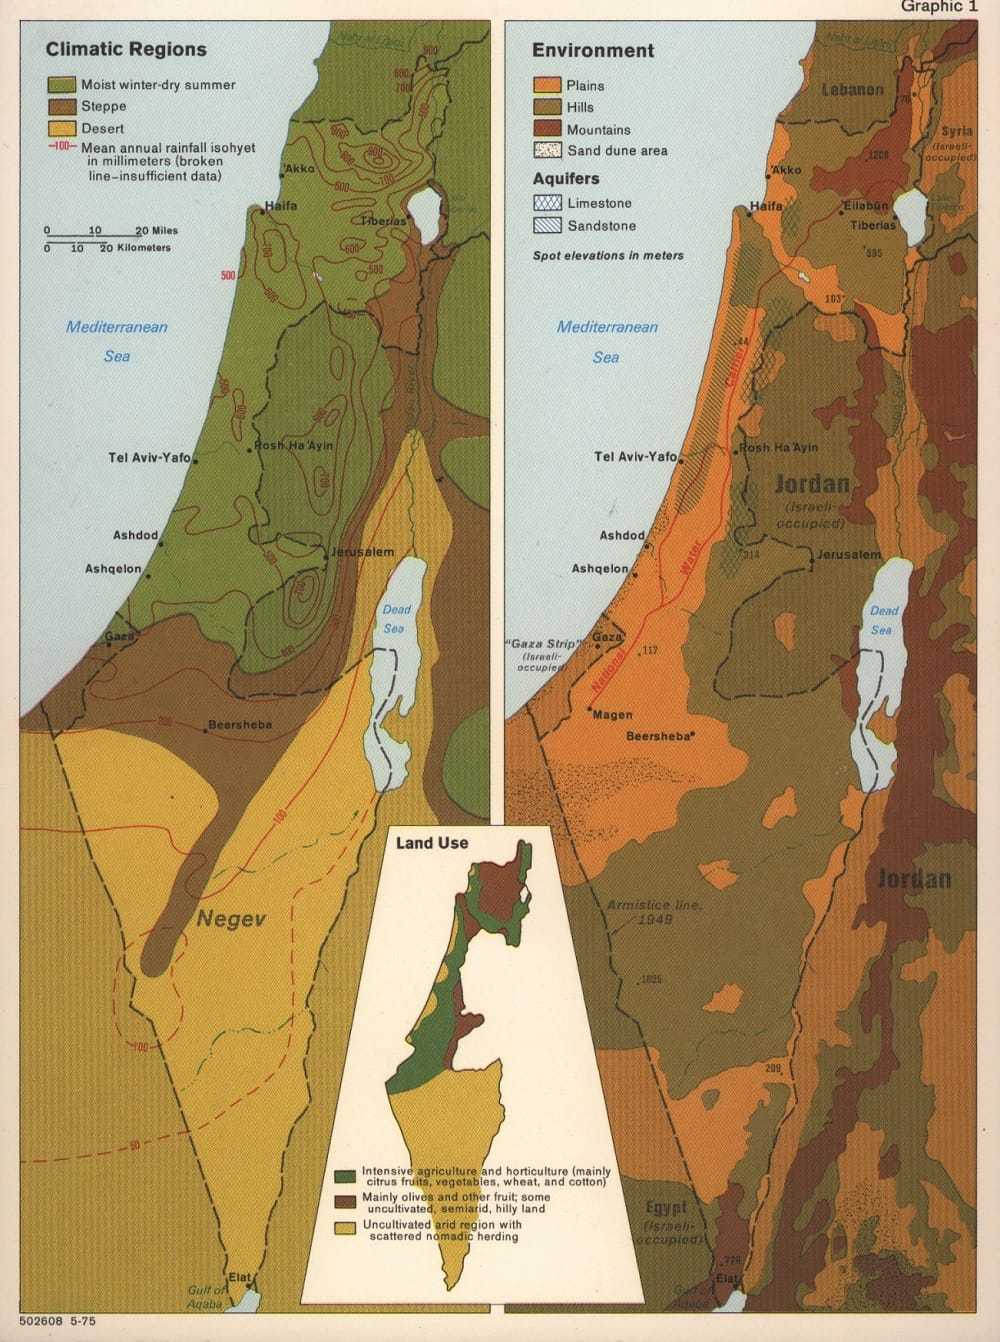 Two versions of the map of Israel: one with green, brown, and yellow, the other with orange, brown, and olive green.